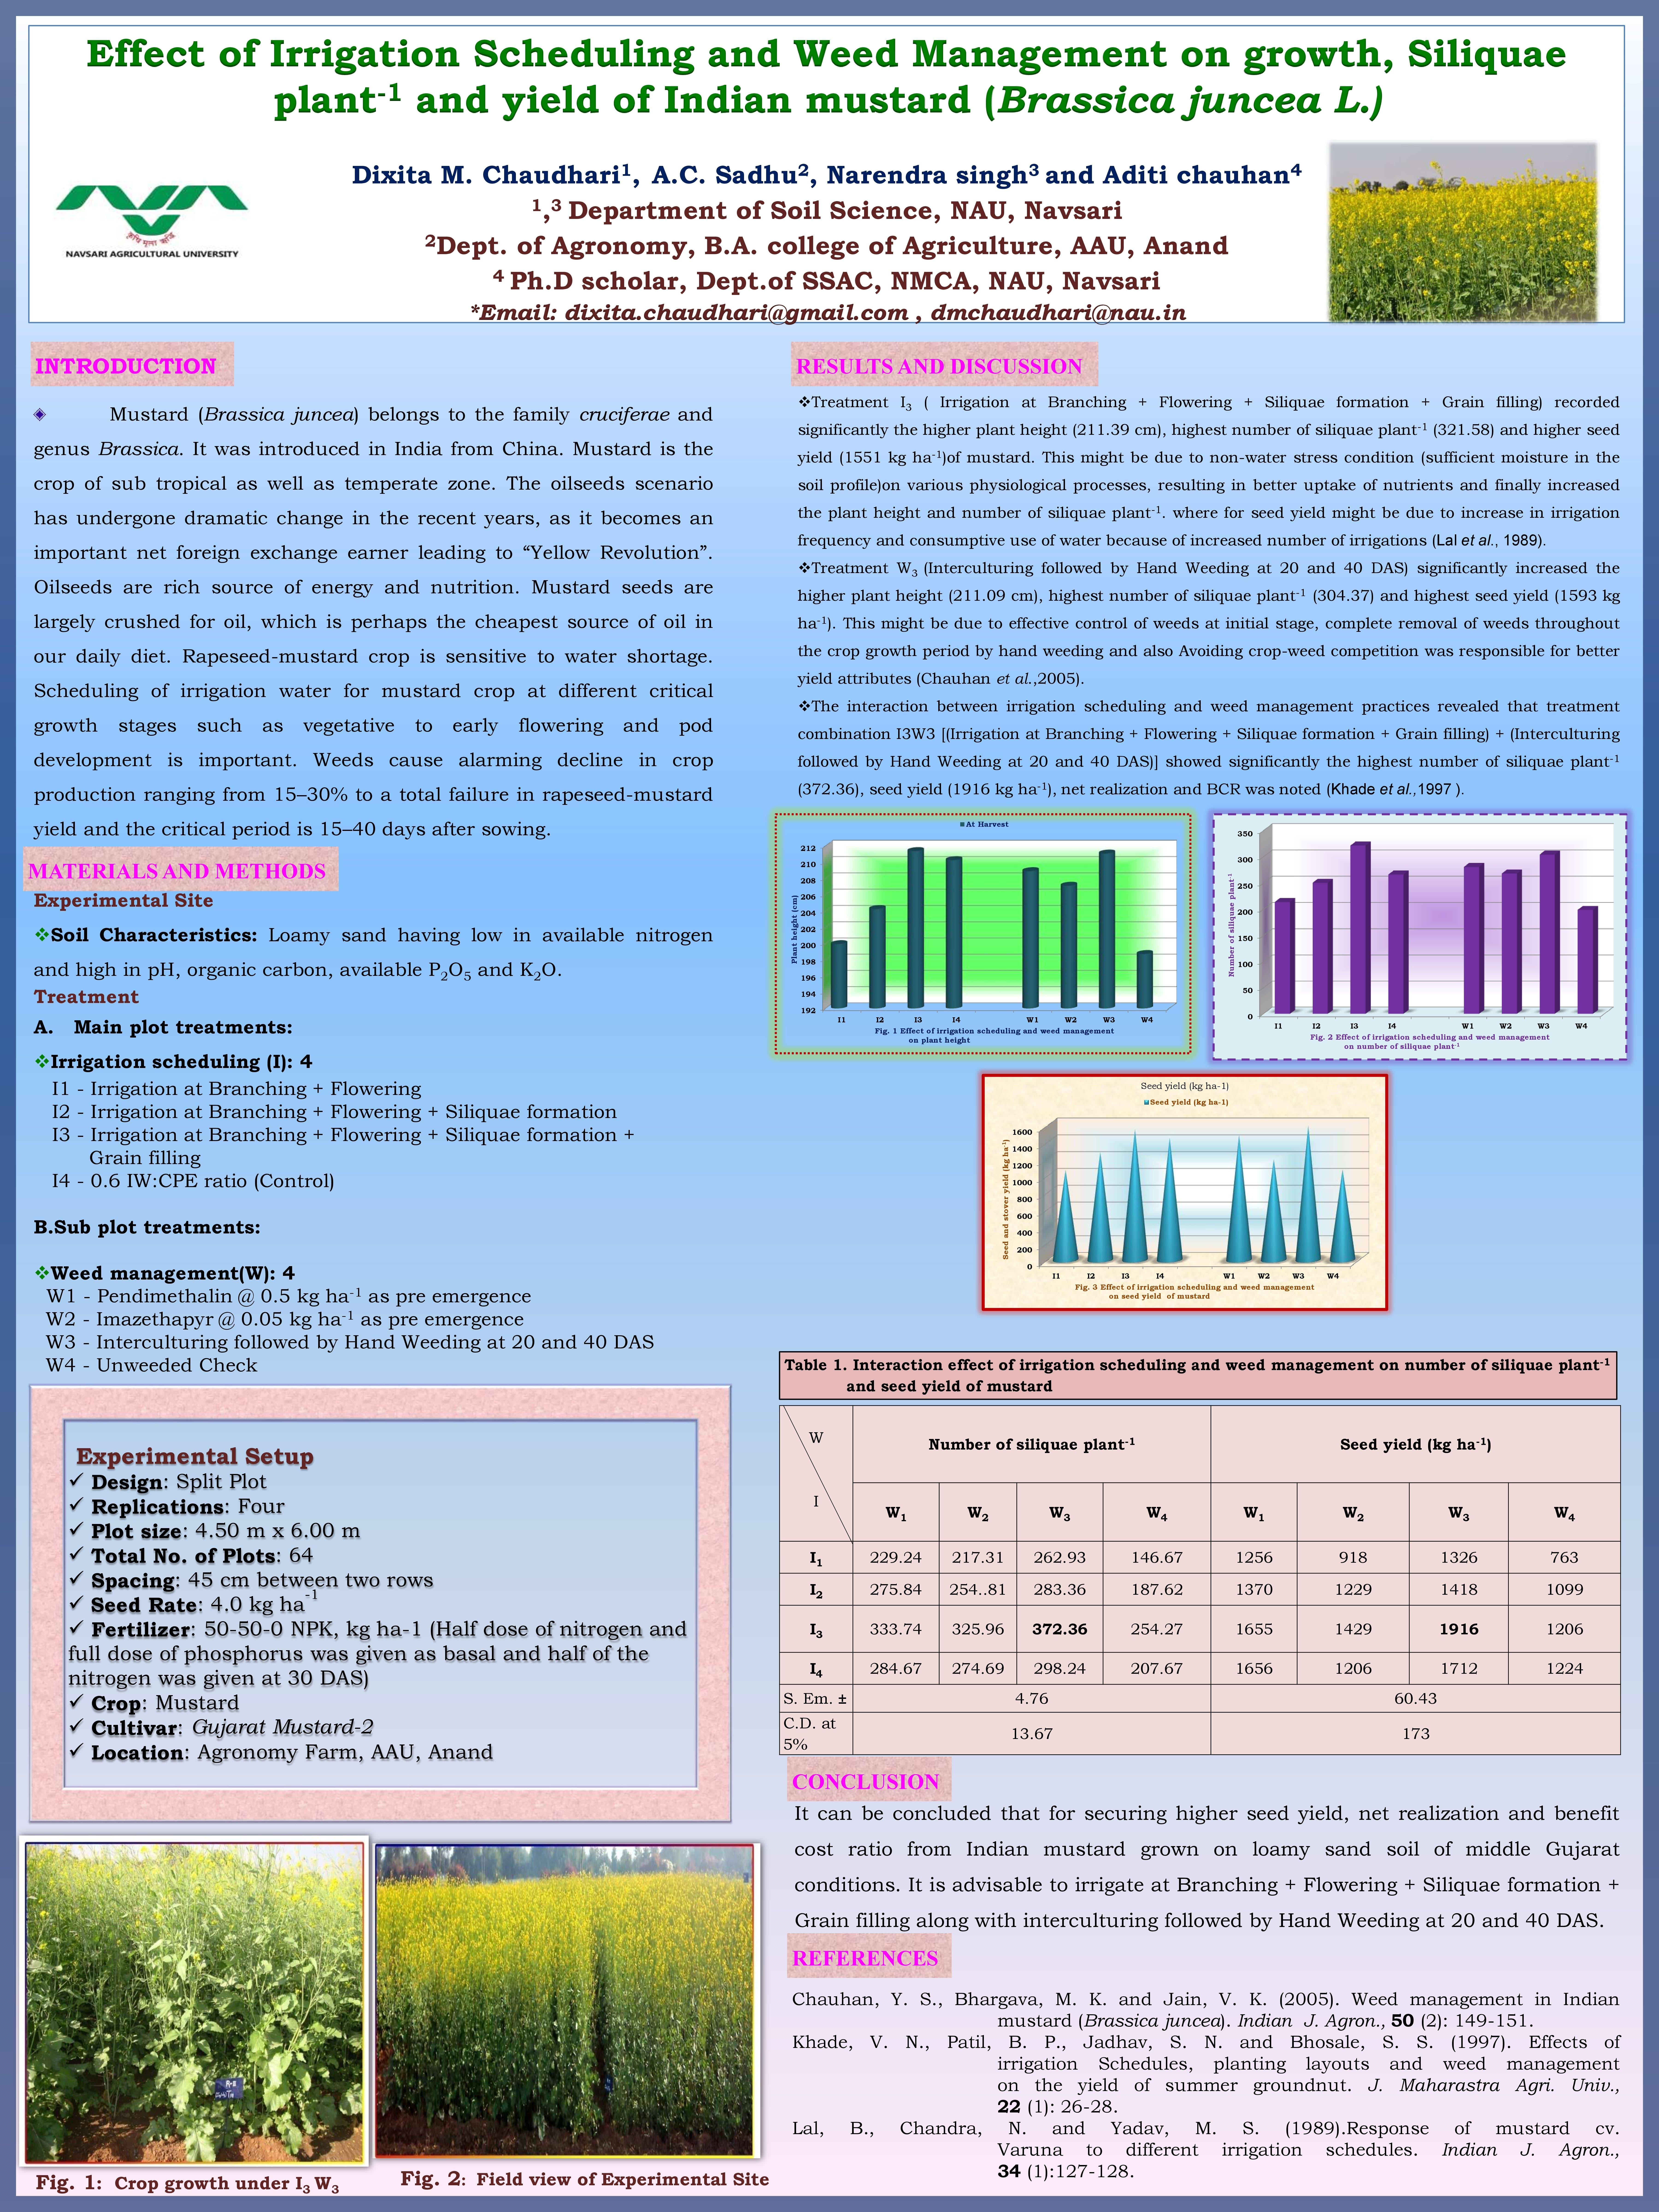 Effect of irrigation scheduling and weed management on growth, siliquae plant -1 and yield of Indian mustard 